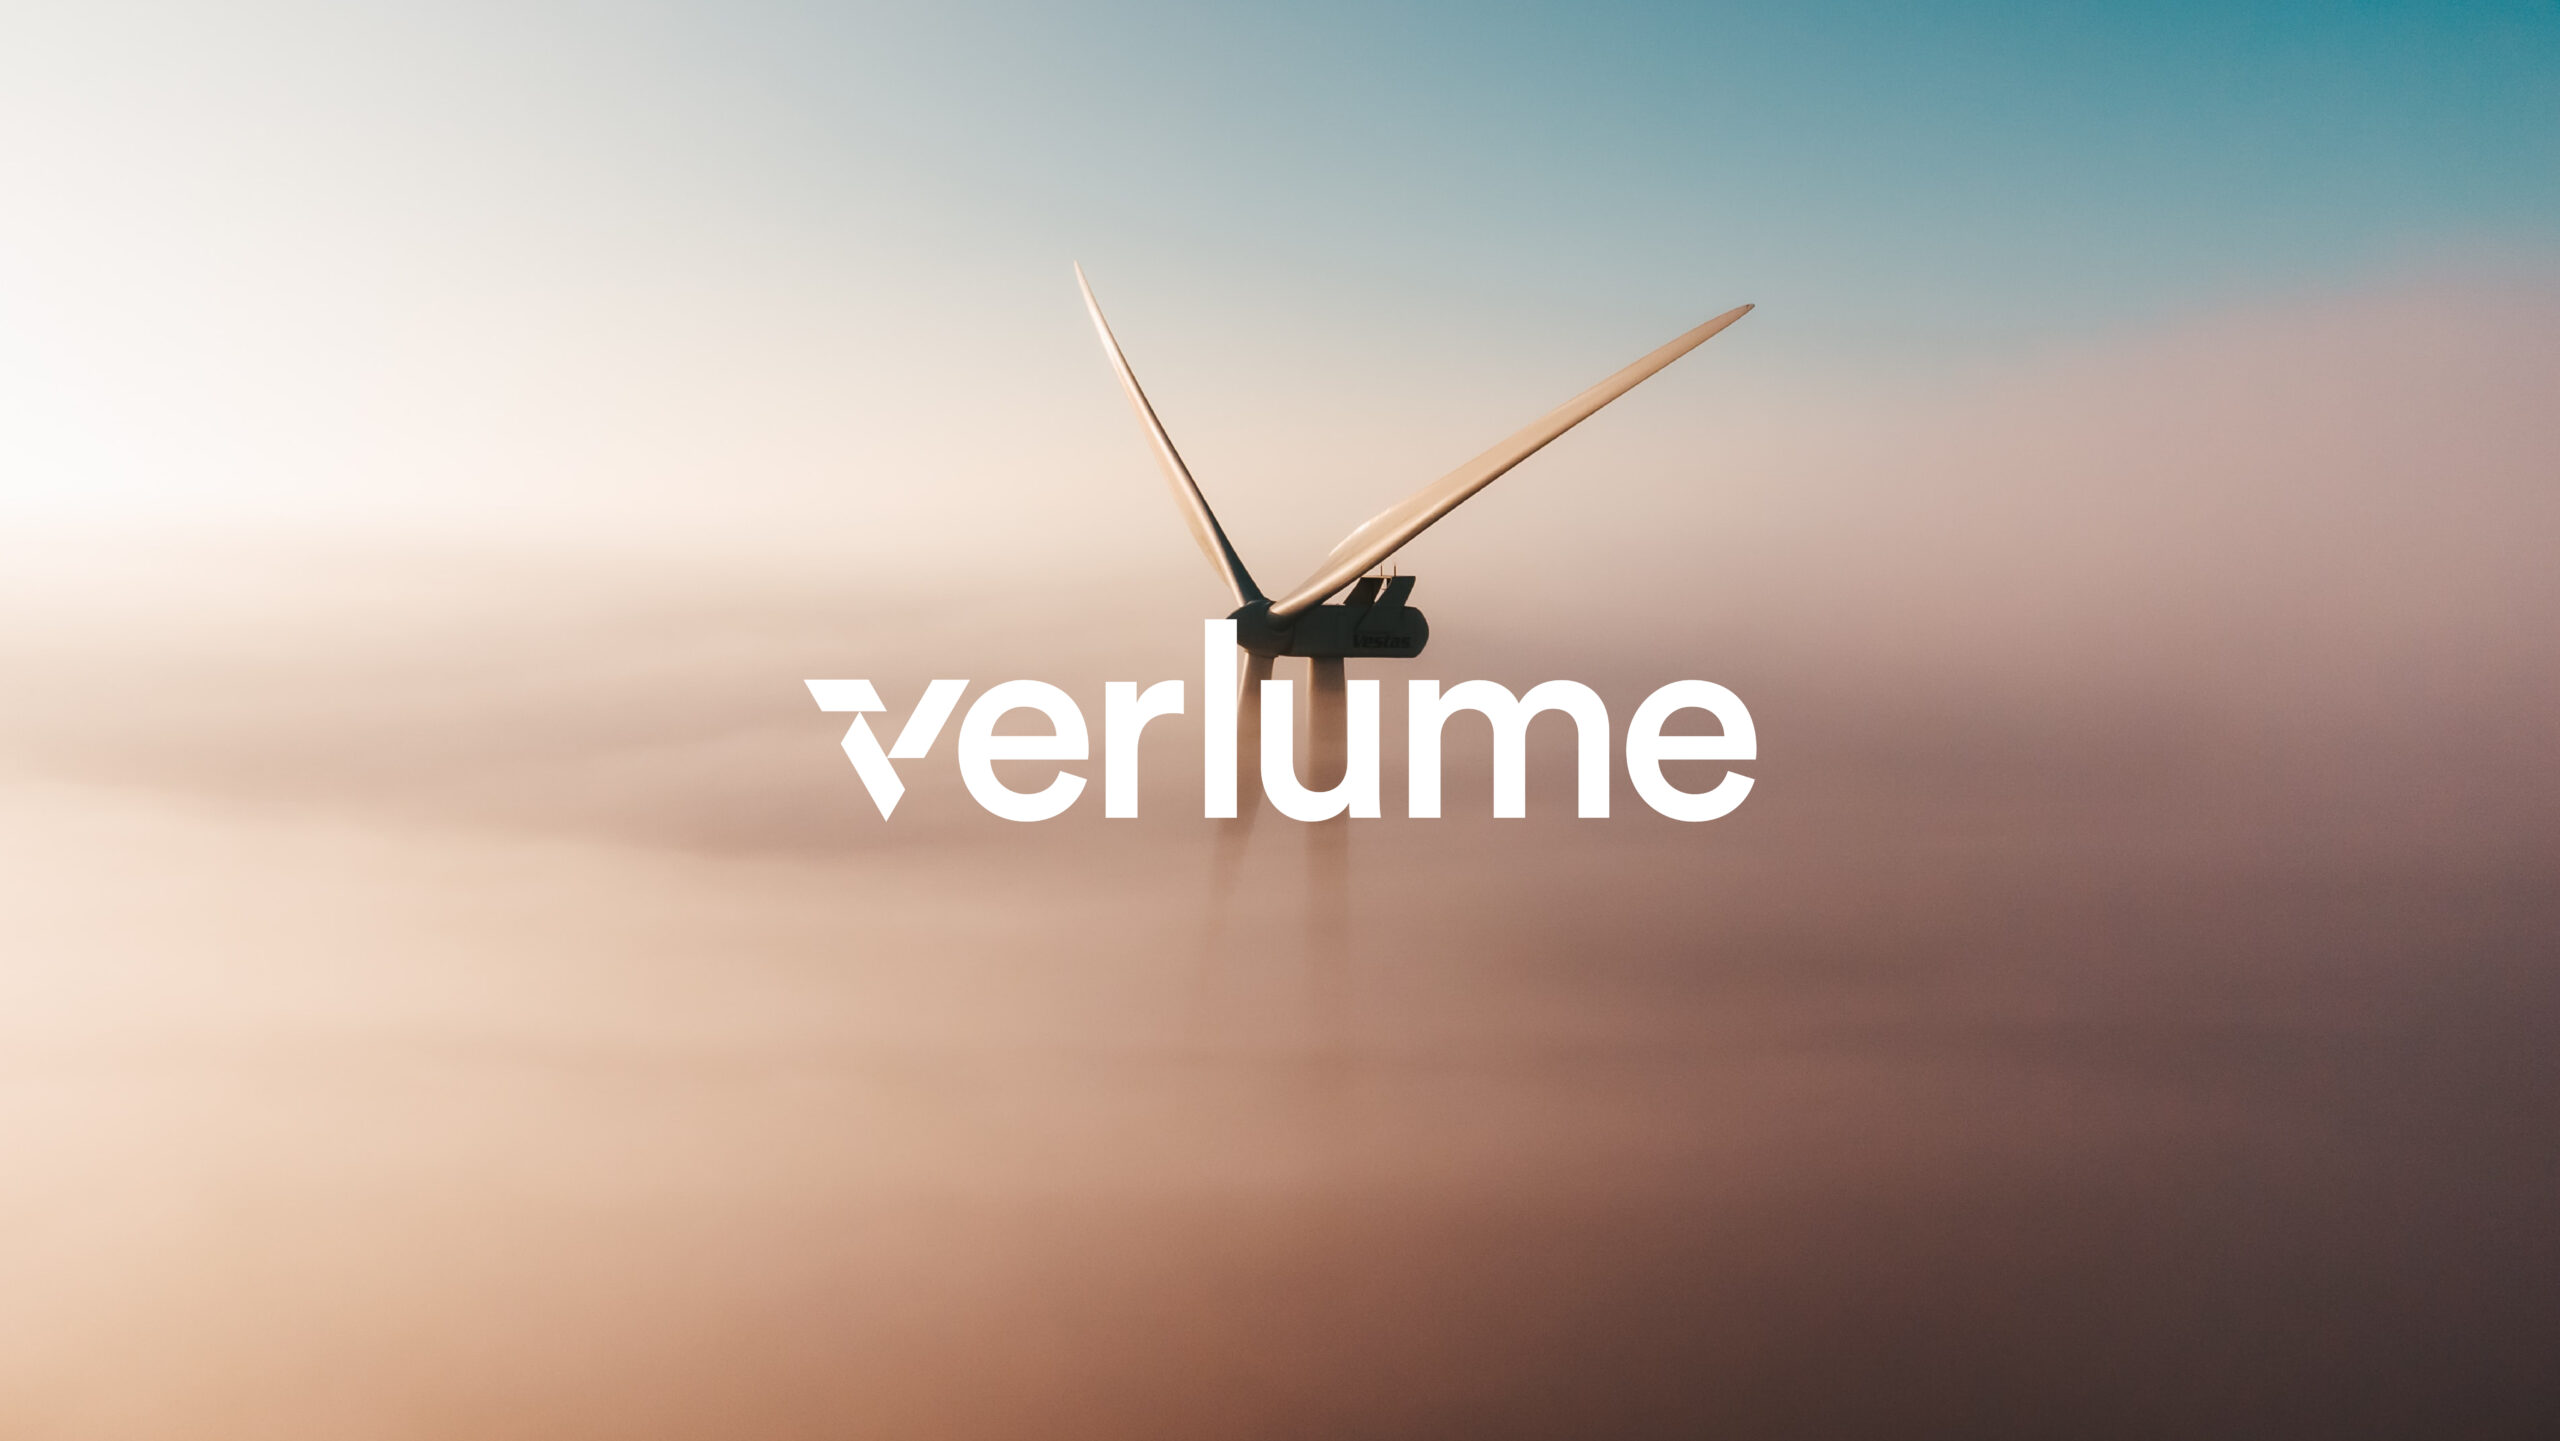 MEMBER NEWS: Verlume shortlisted in two categories at low-carbon awards